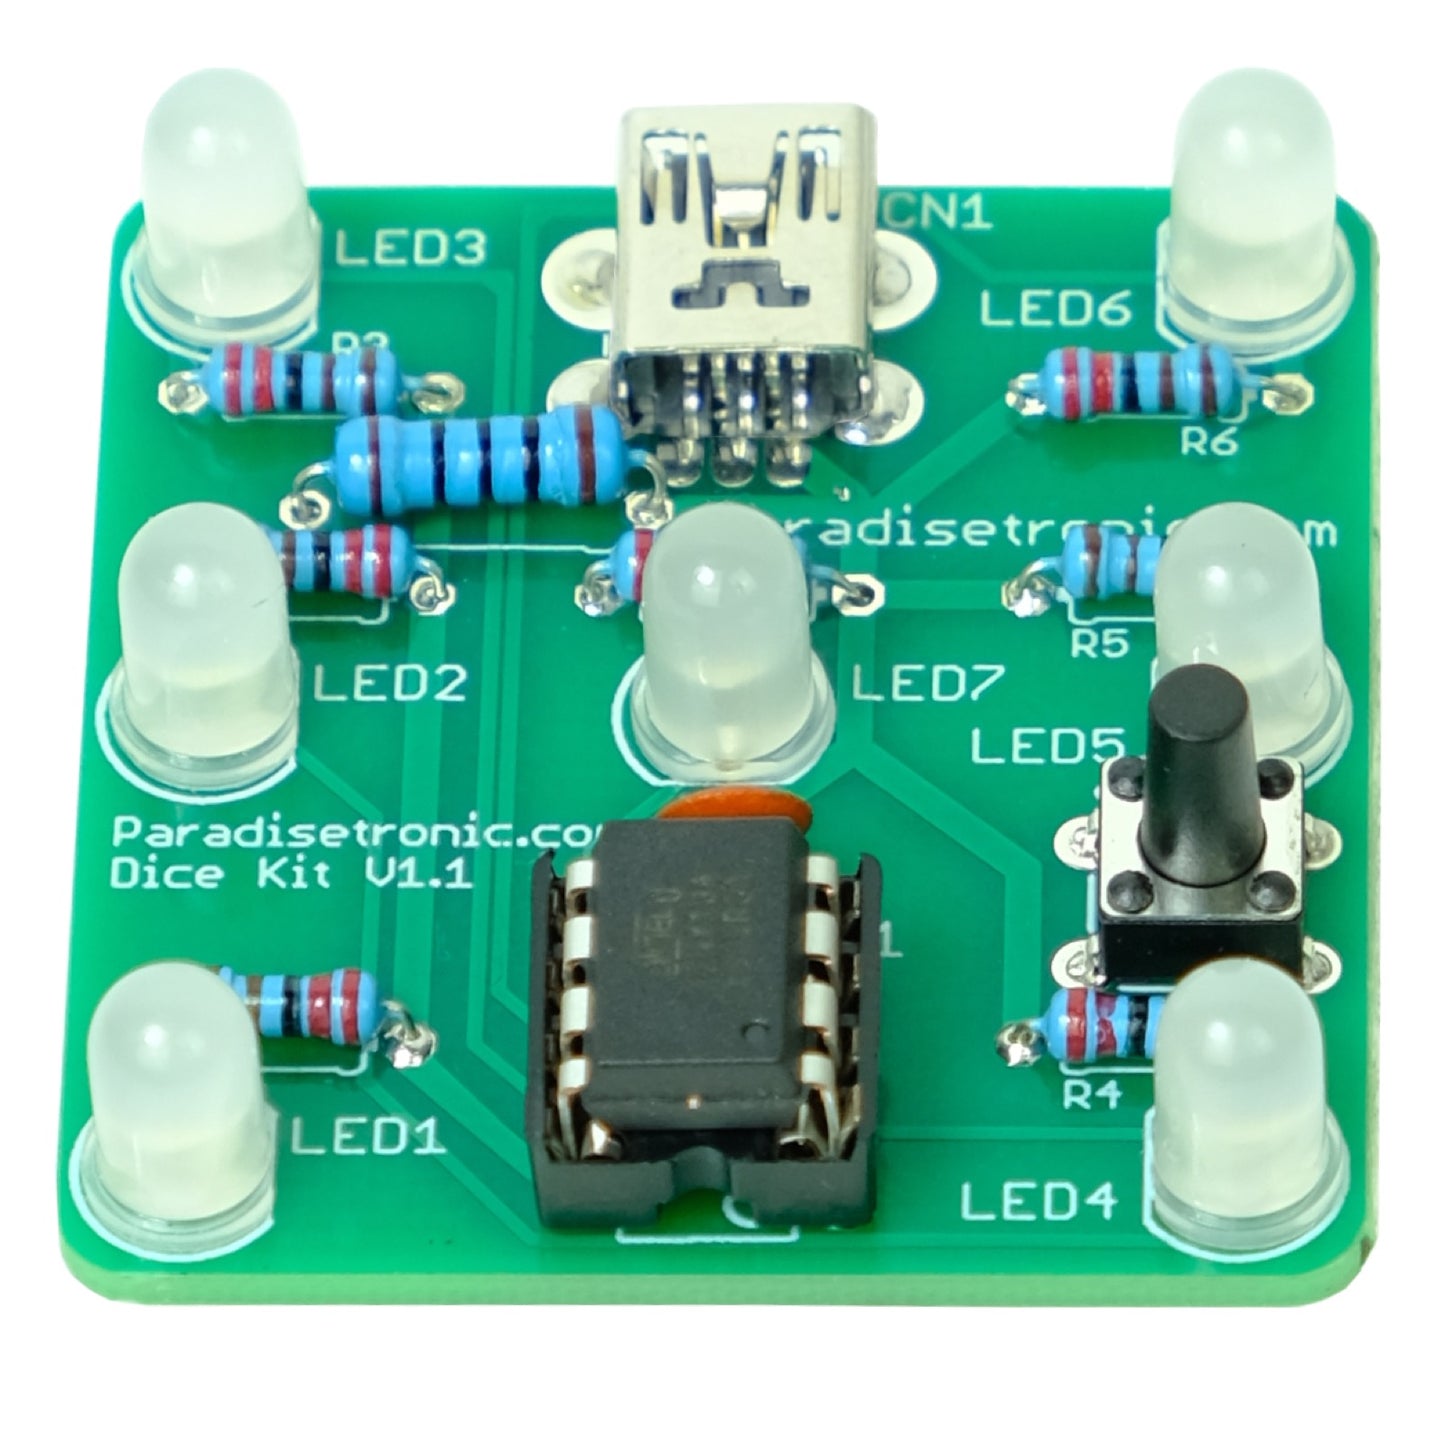 Dice Kit by Paradisetronic.com with green PCB, diffuse LEDs and Atmel AVR Microcontroller